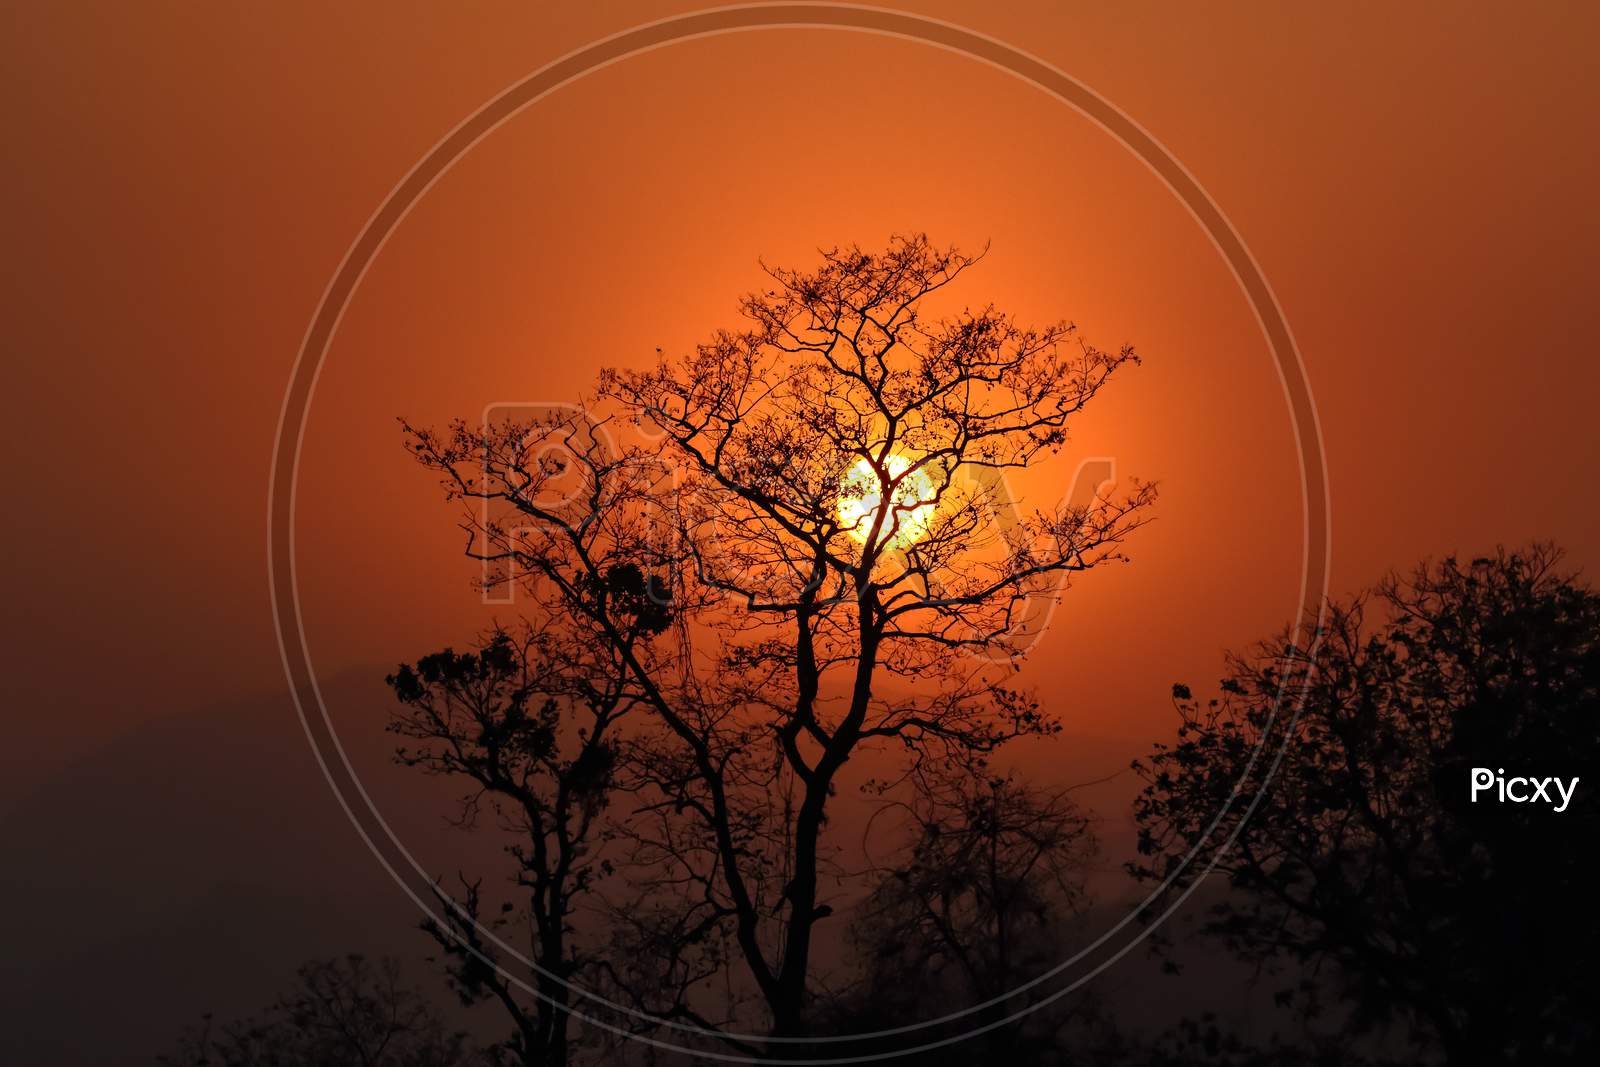 Silhouette of a tree with sun and red and orange sky in the background